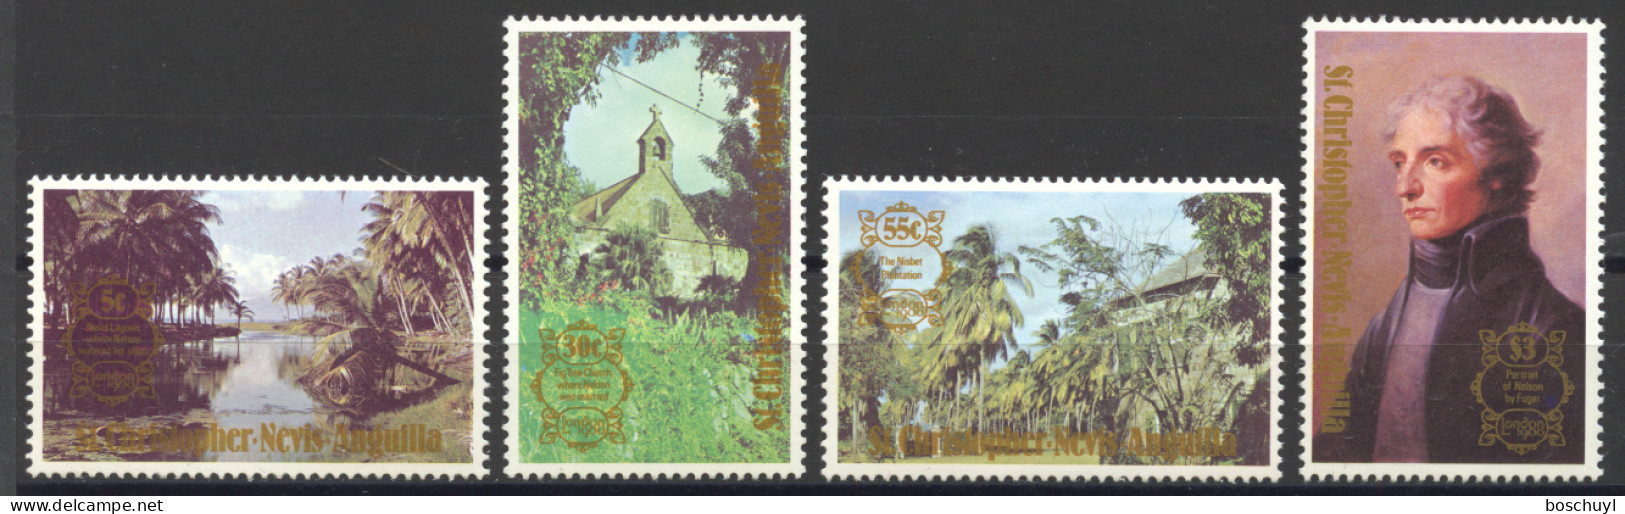 St Christopher, Nevis And Anguilla, 1980, London Stamp Exhibition, Lord Nelson, Lagoon, Church, MNH, Michel 392-395 - St.Christopher-Nevis-Anguilla (...-1980)